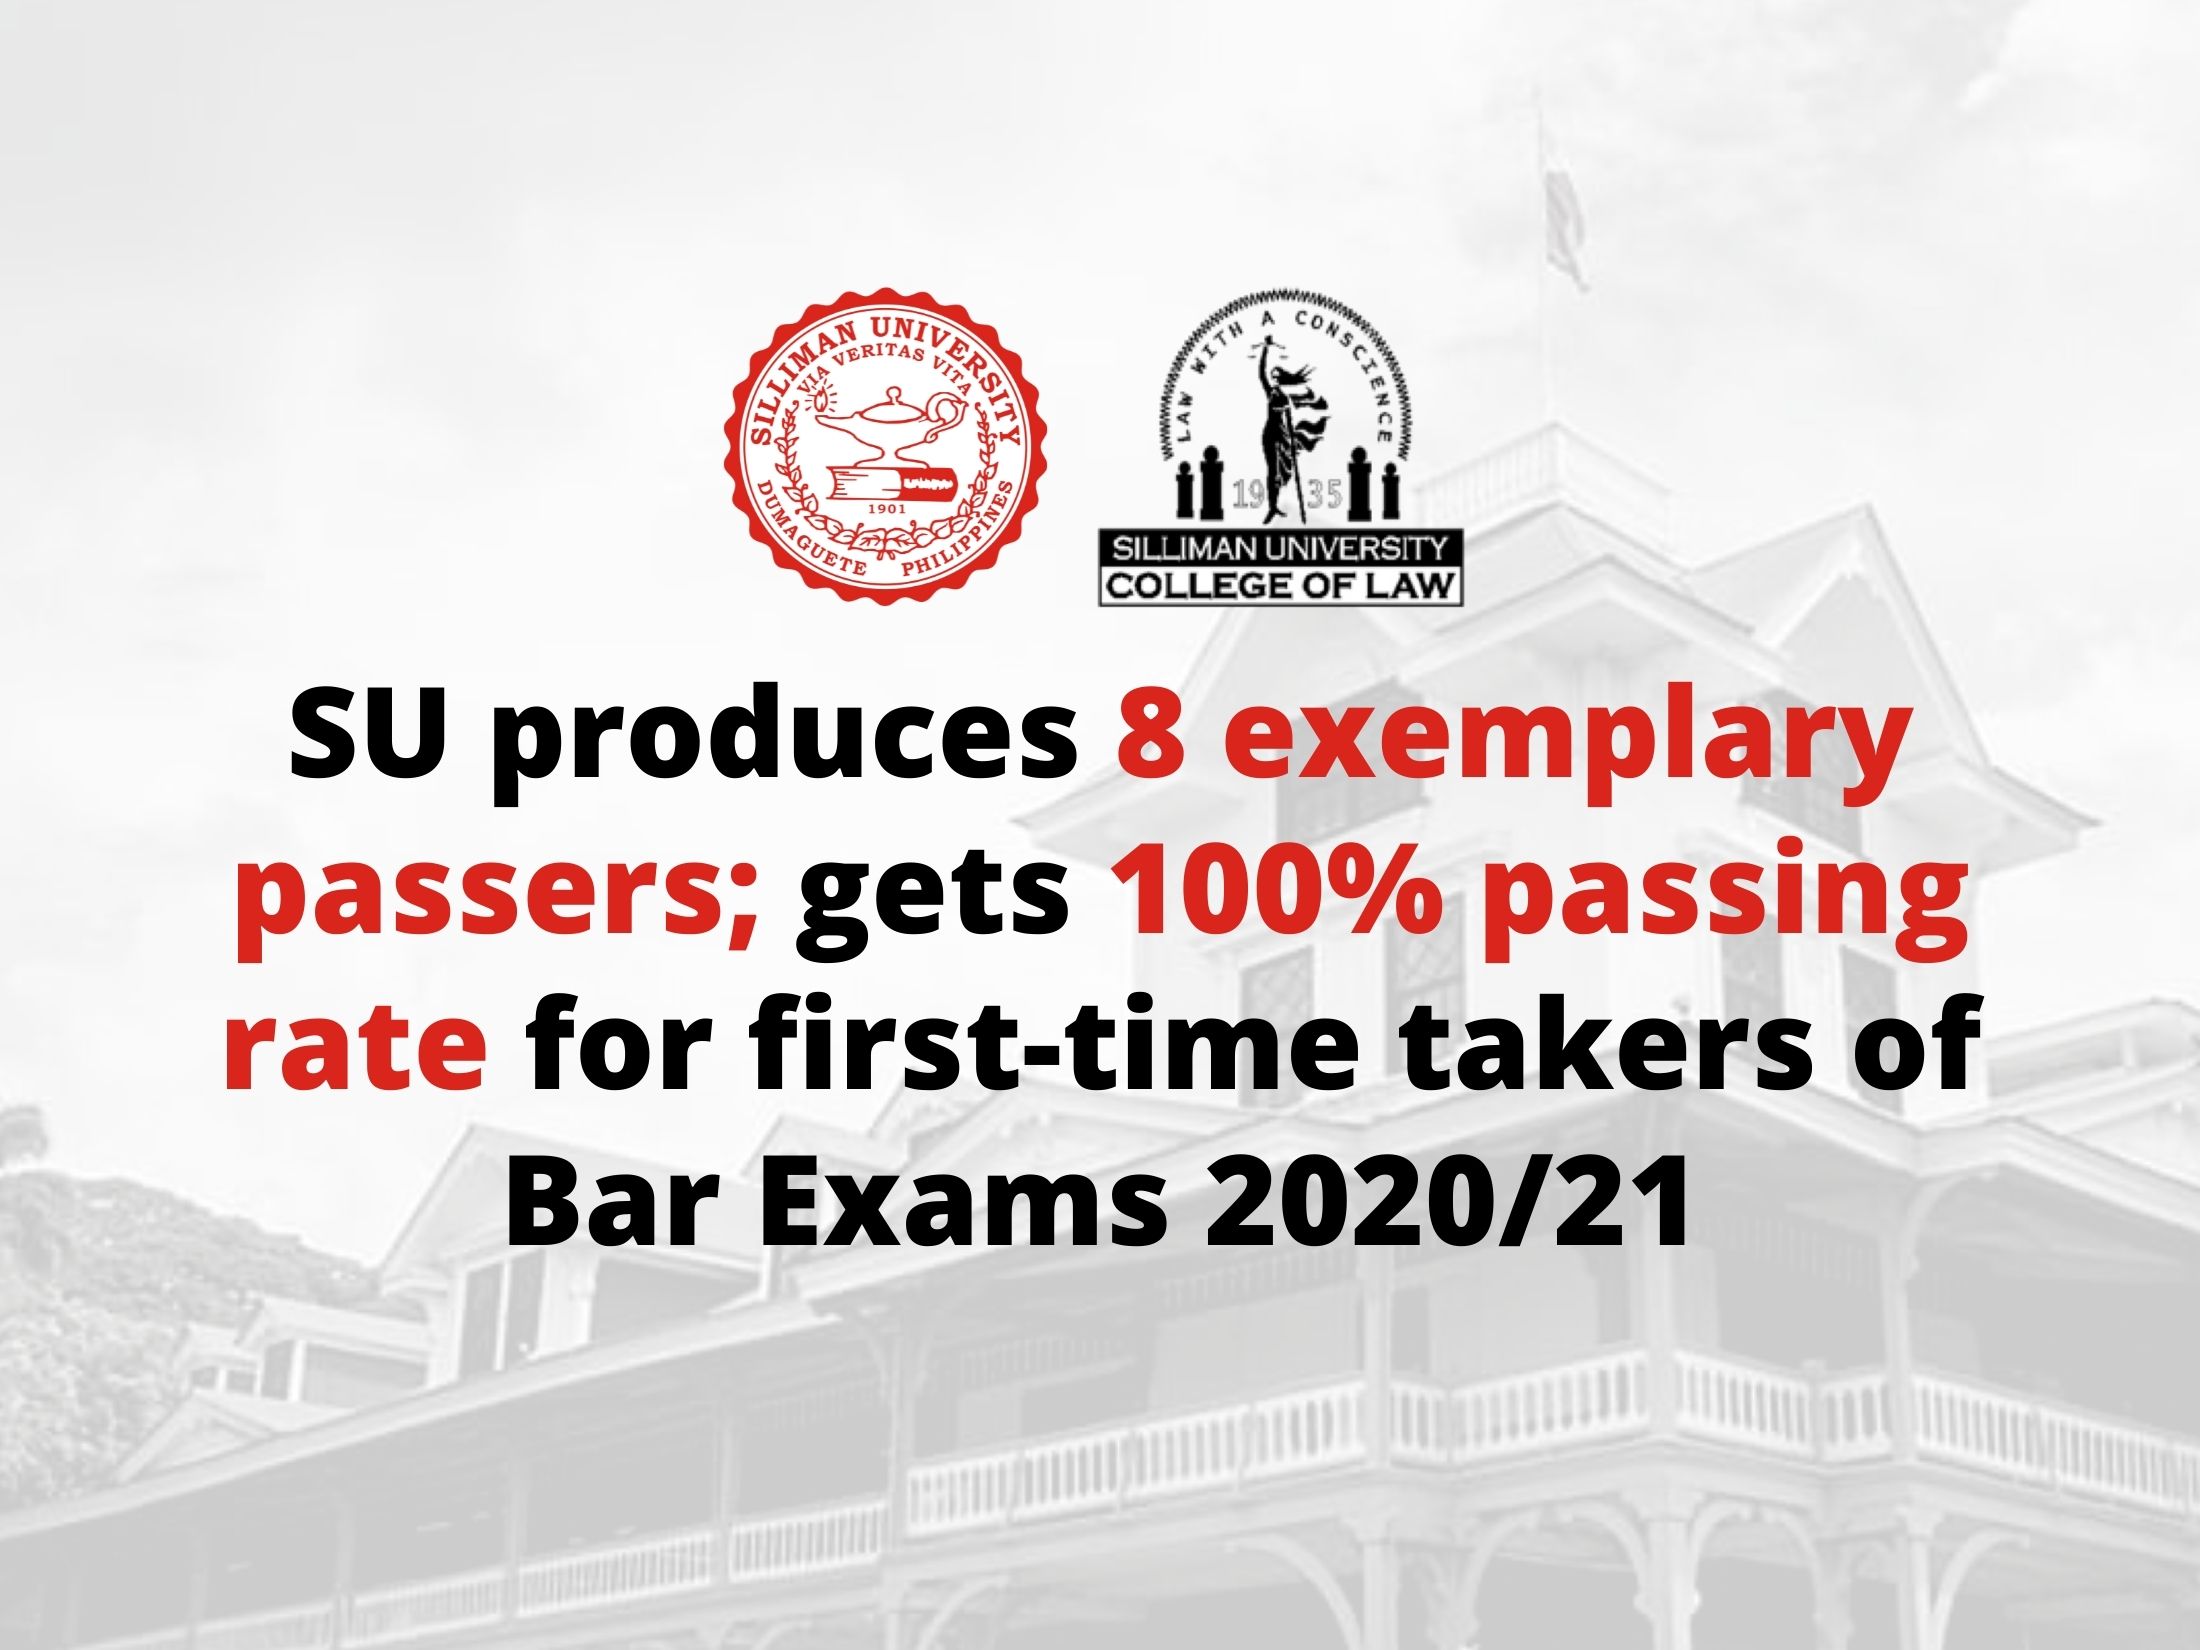 SU produces 8 exemplary passers; gets 100% passing rate for first-time takers of Bar Exams 2020/21